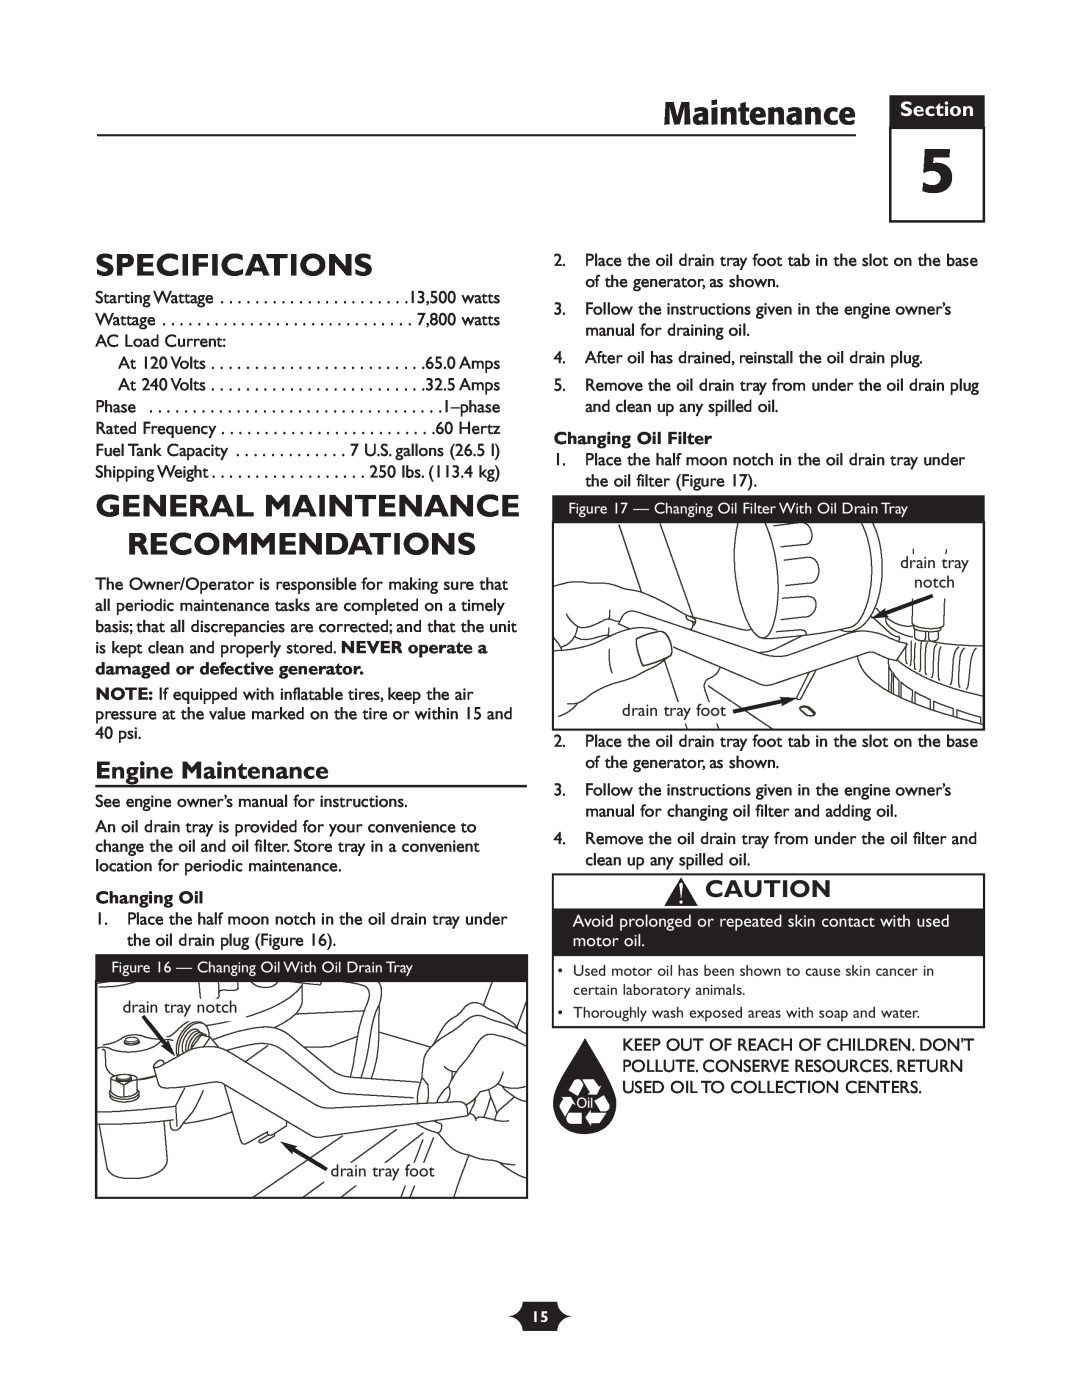 Briggs & Stratton 30237 Maintenance Section, Specifications, General Maintenance Recommendations, Engine Maintenance 